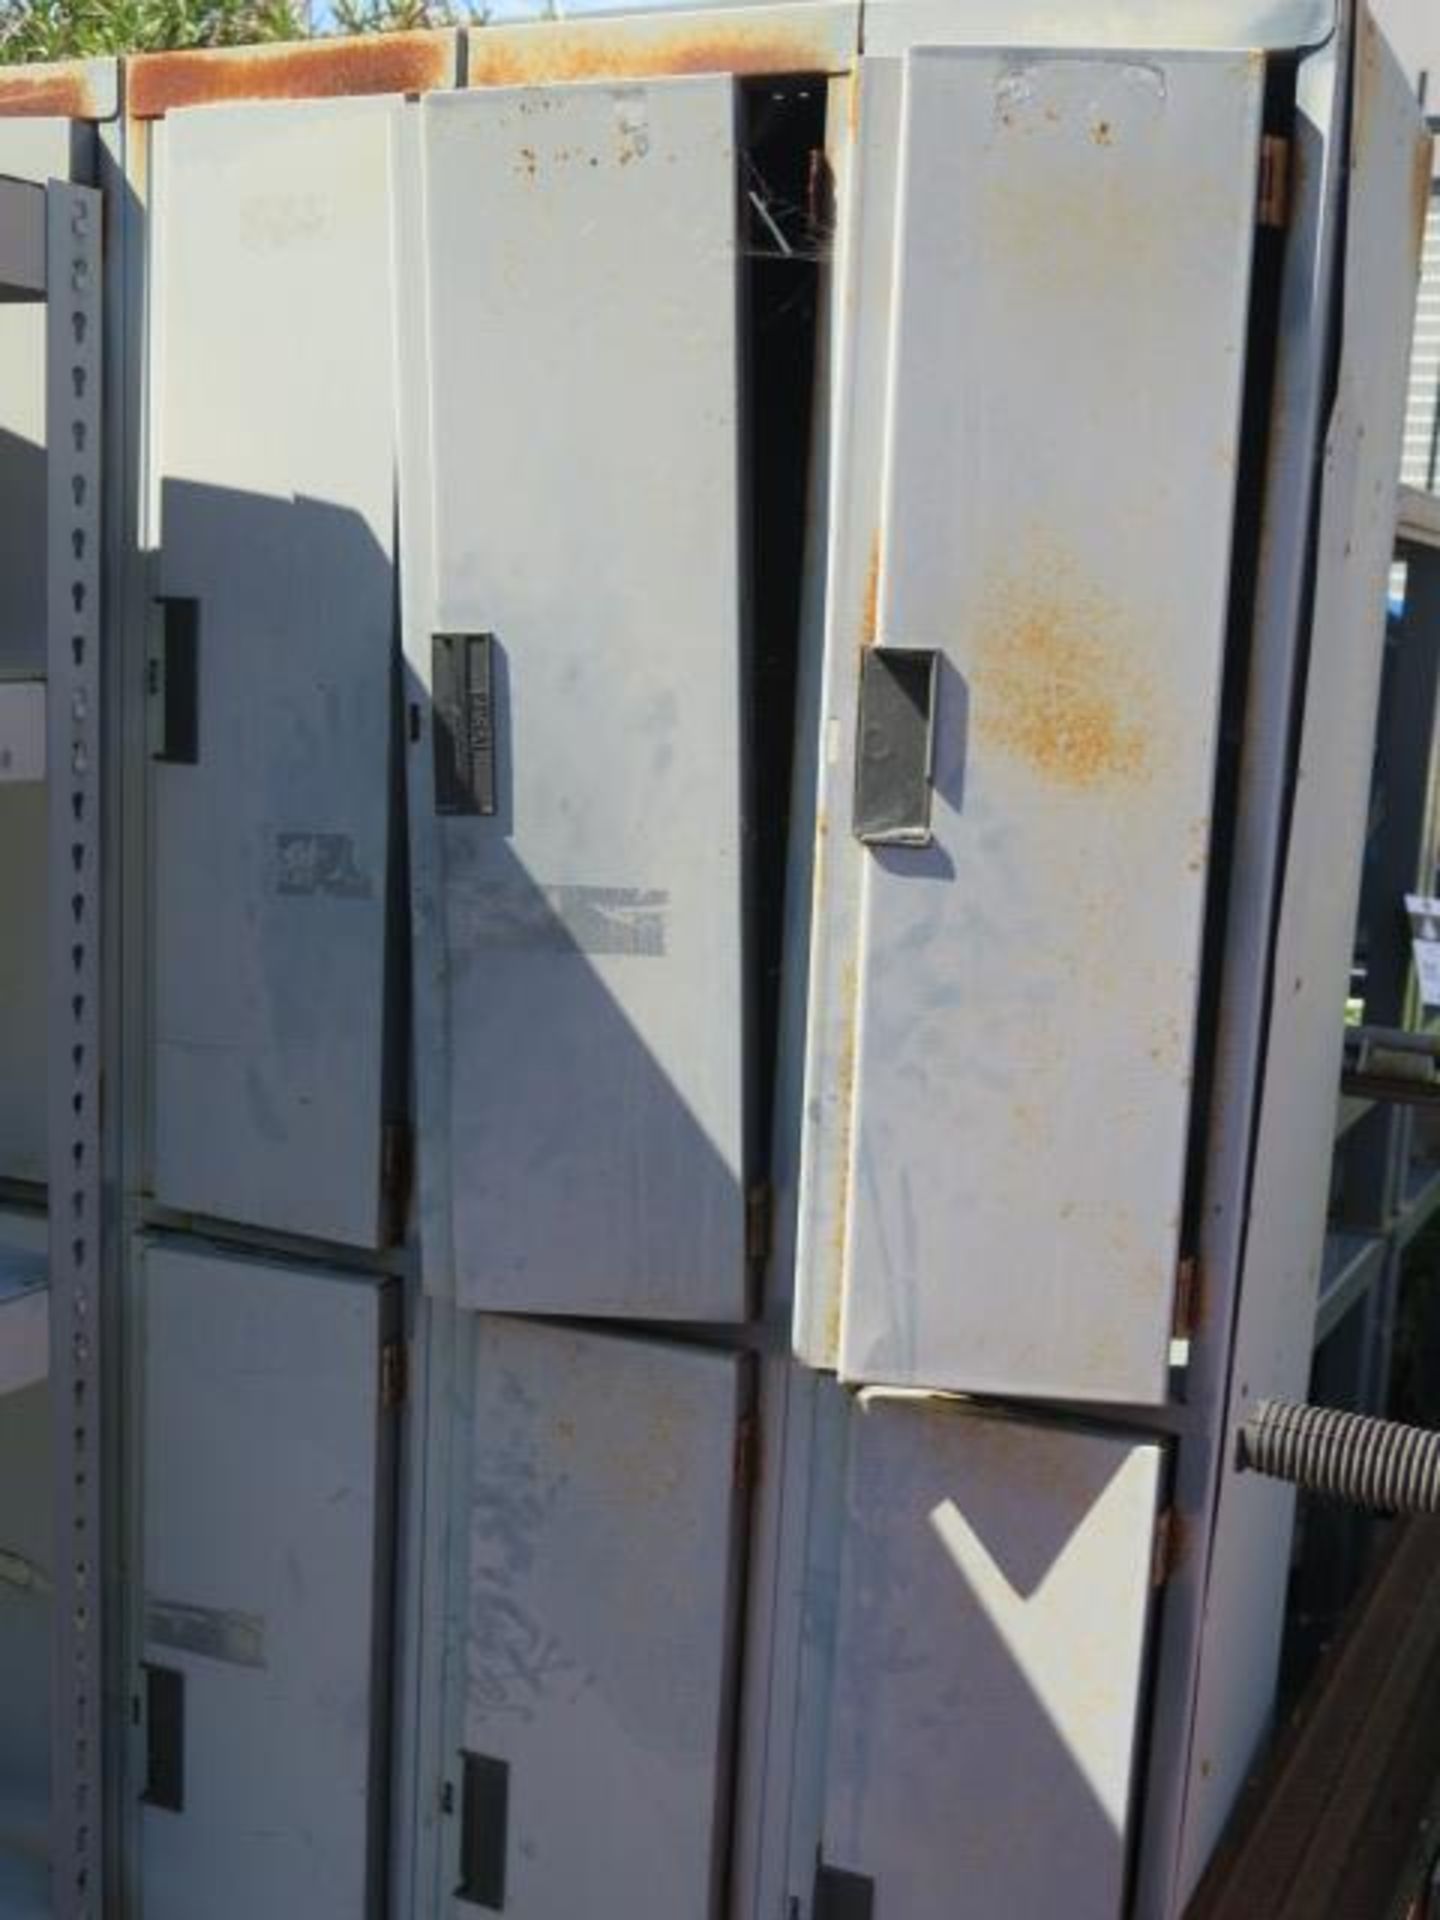 Employee Lockers, Storage Cabinet and Shelf (SOLD AS-IS - NO WARRANTY) (Located at 2091 Fortune Dr., - Image 7 of 7